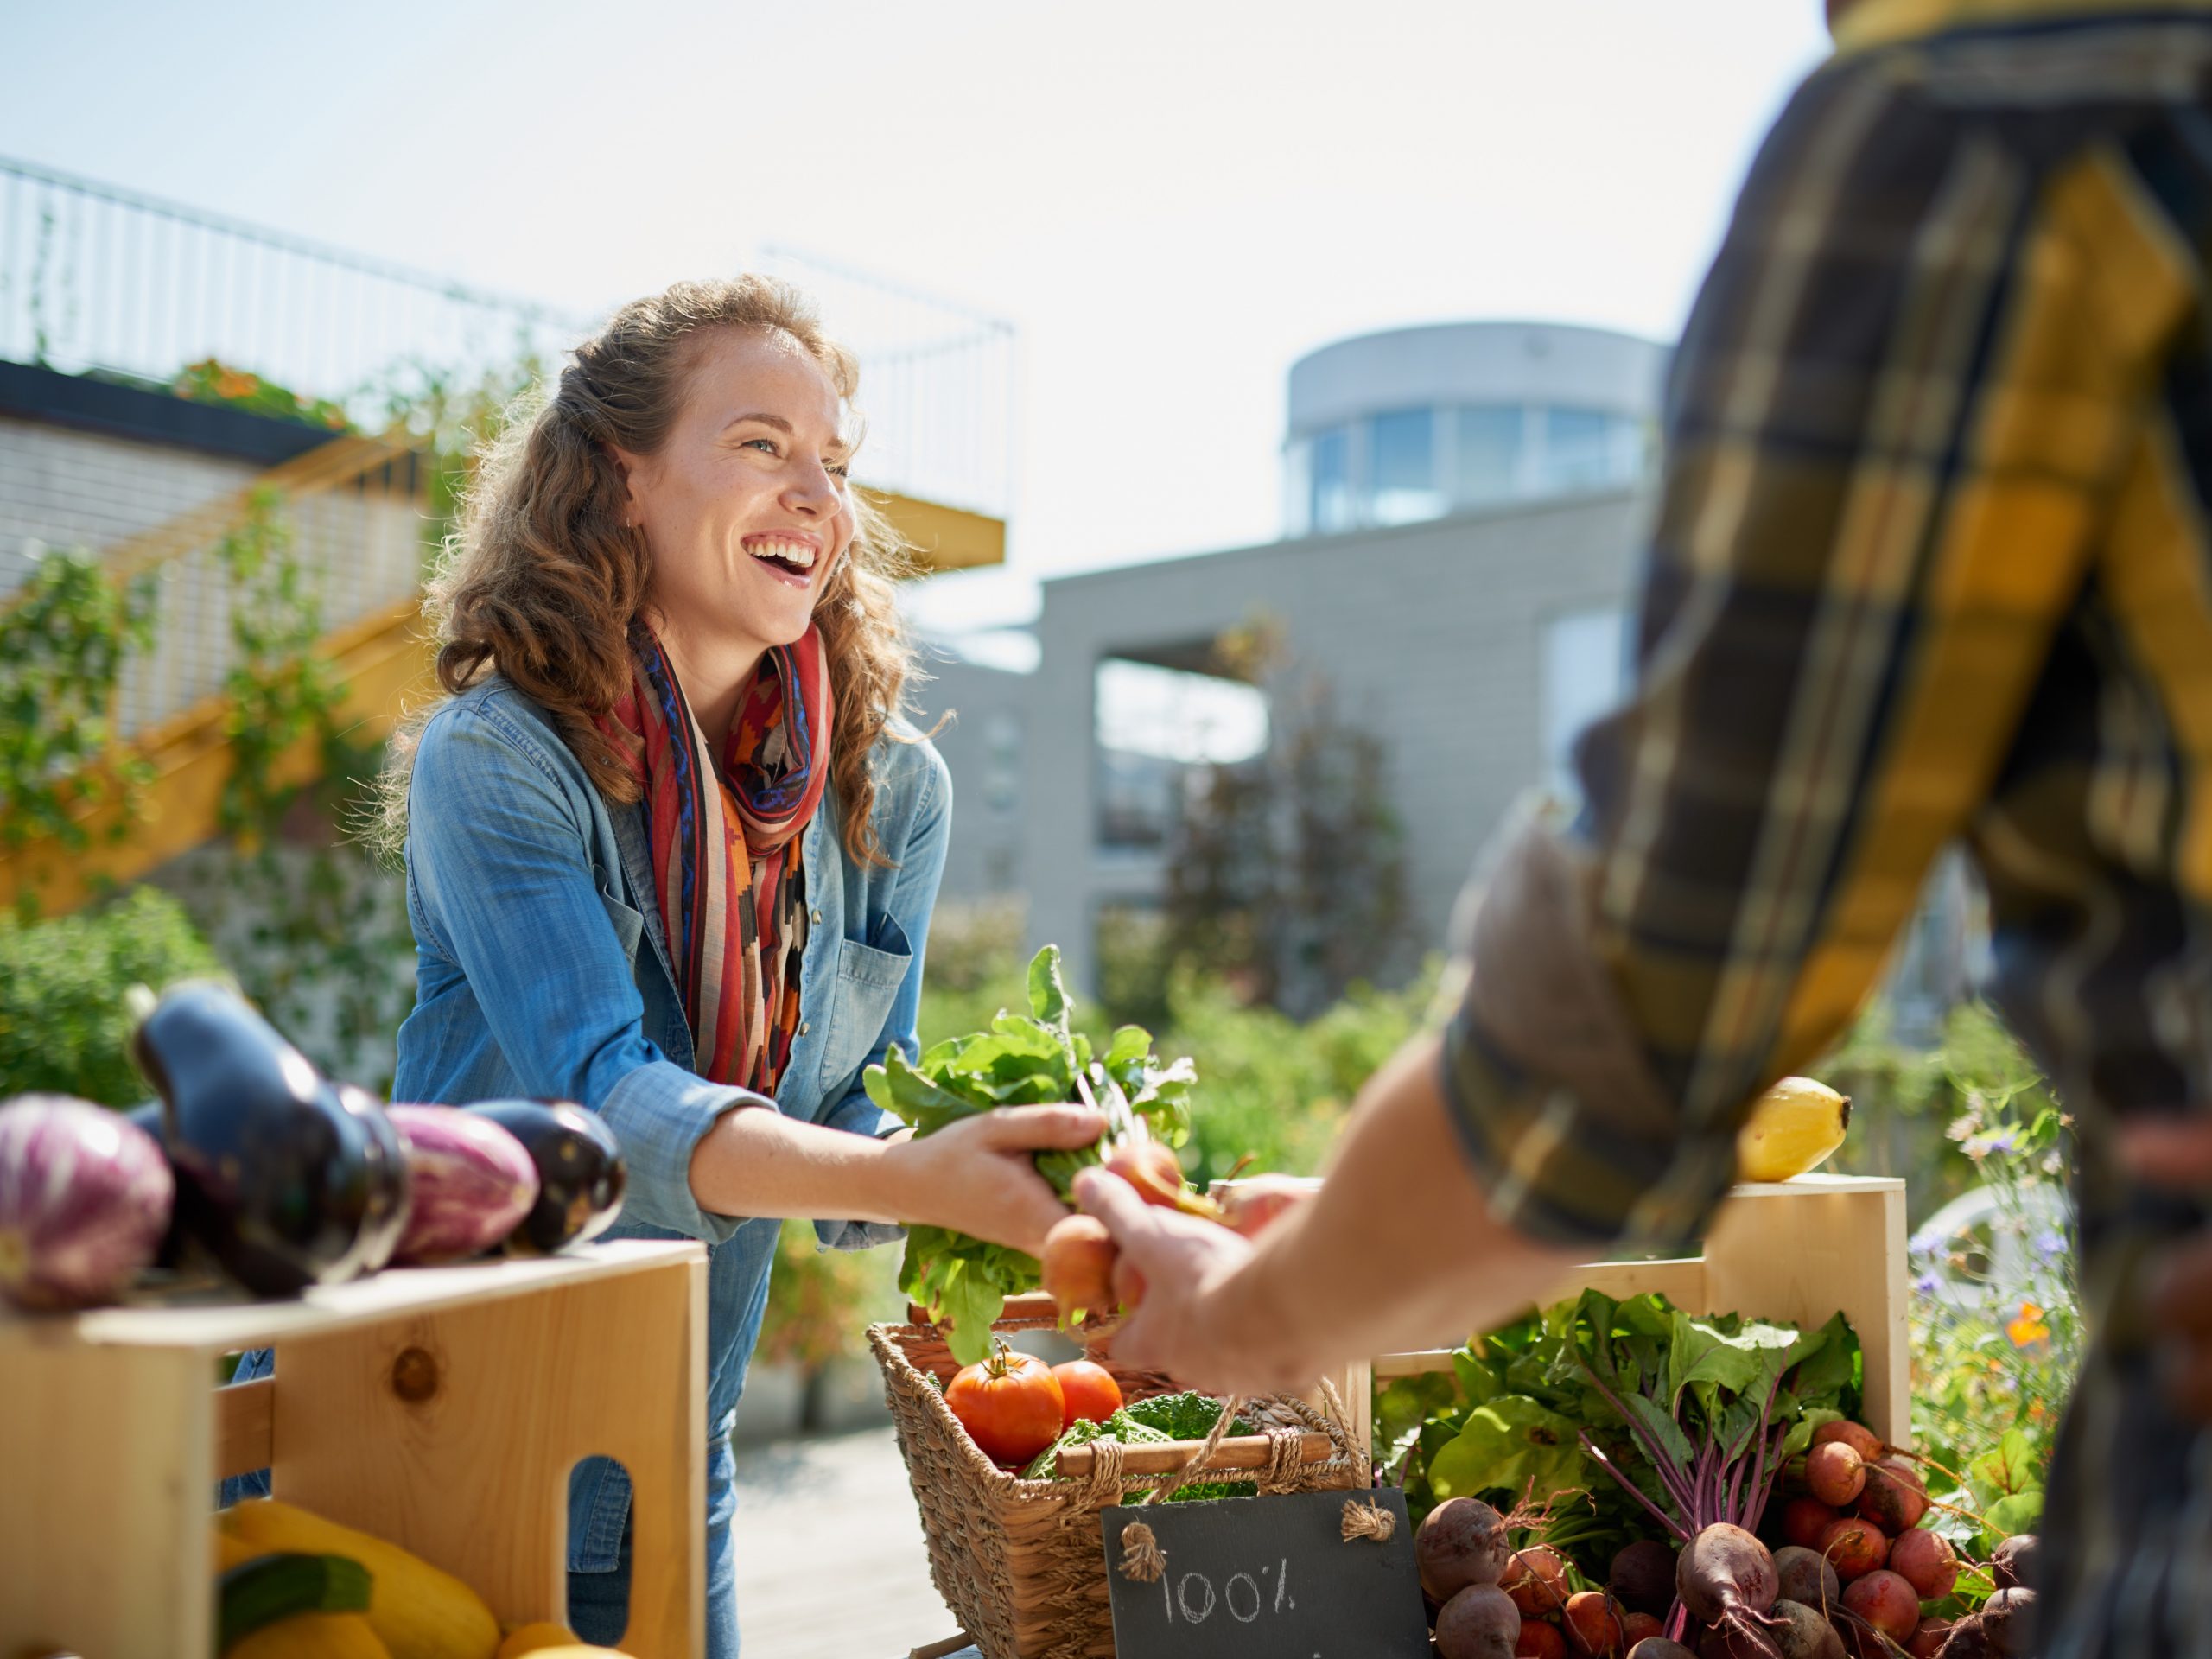 The focus of the Food in the Capital conference, held over two days in October 2020 and May 2021, was on the critical role food production, consumption and new technology will play in helping Canberra to become a fully sustainable city.